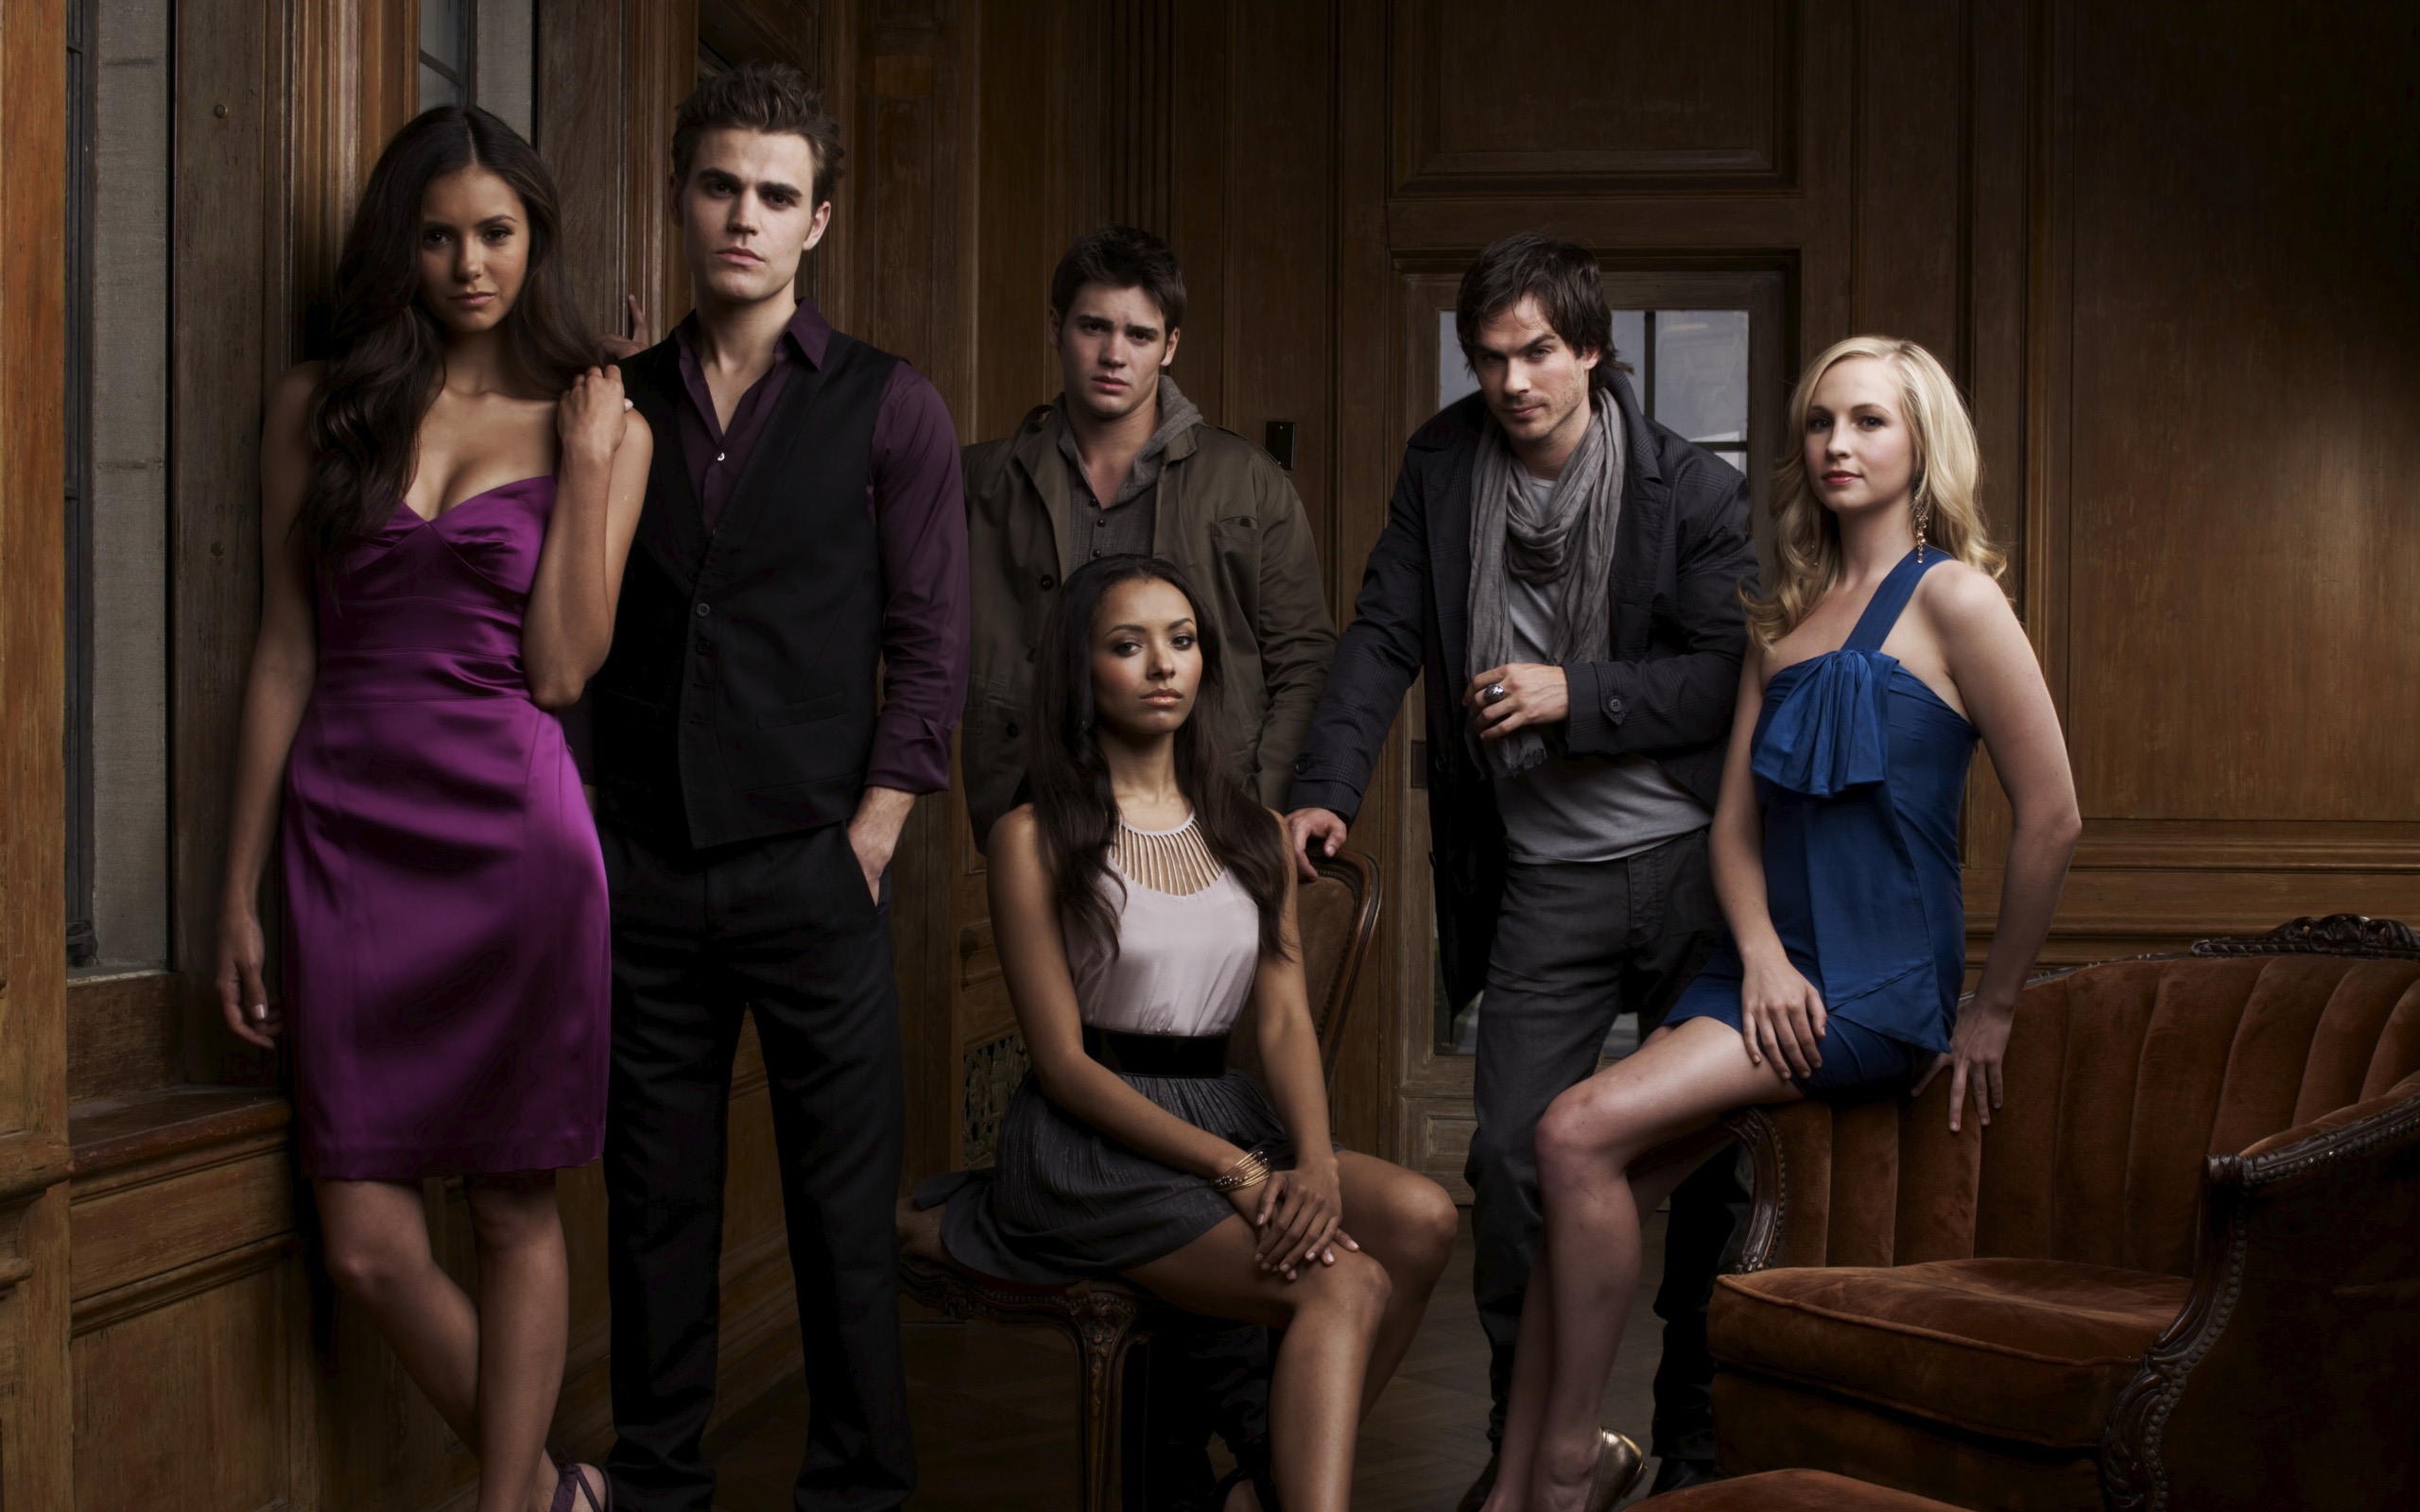 The Vampire Diaries wallpapers HD #19 - 2560x1600